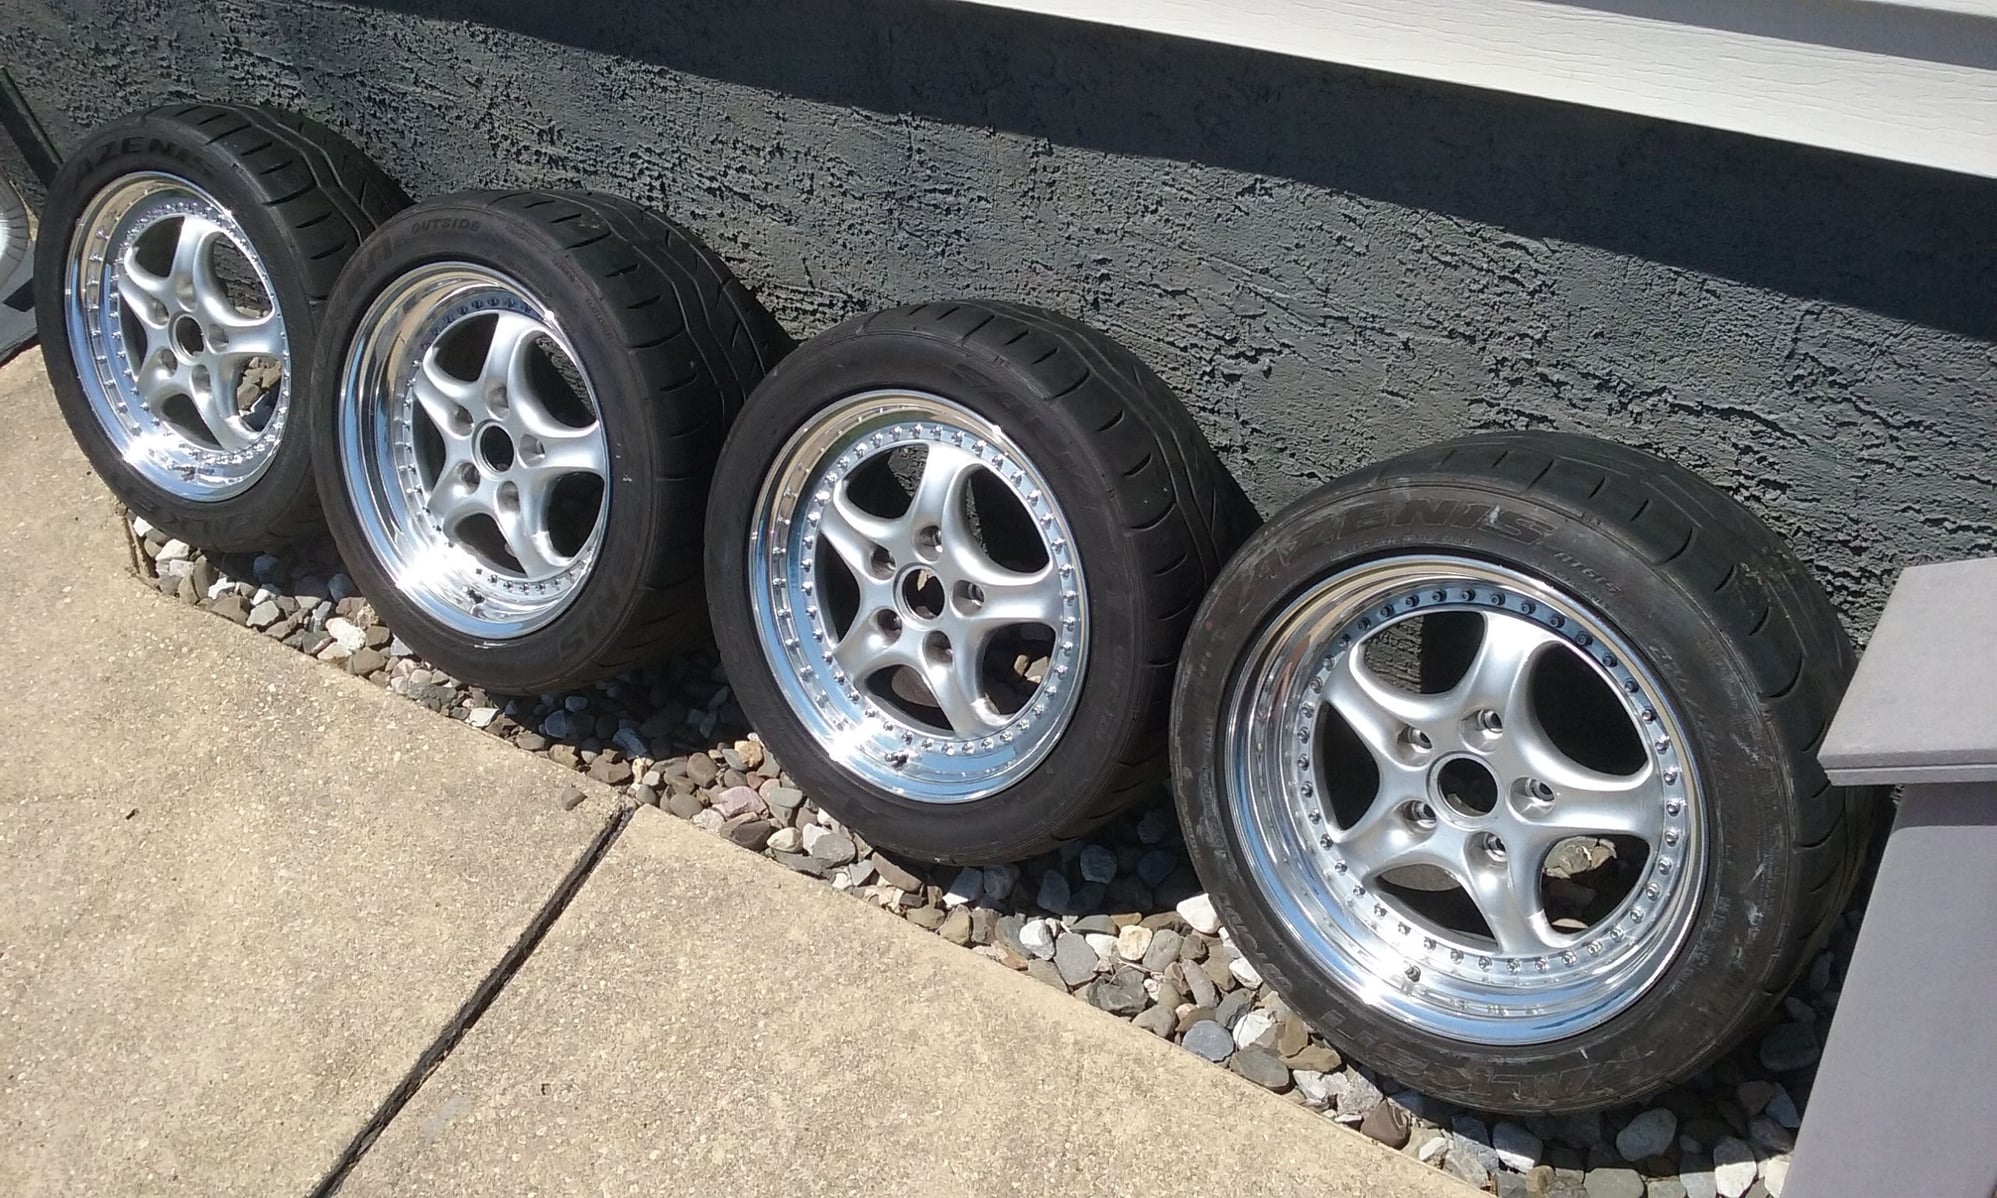 Wheels and Tires/Axles - Kinesis Supercup Wheels - 17x8 & 17x10 - Used - Bellmore, NY 11710, United States